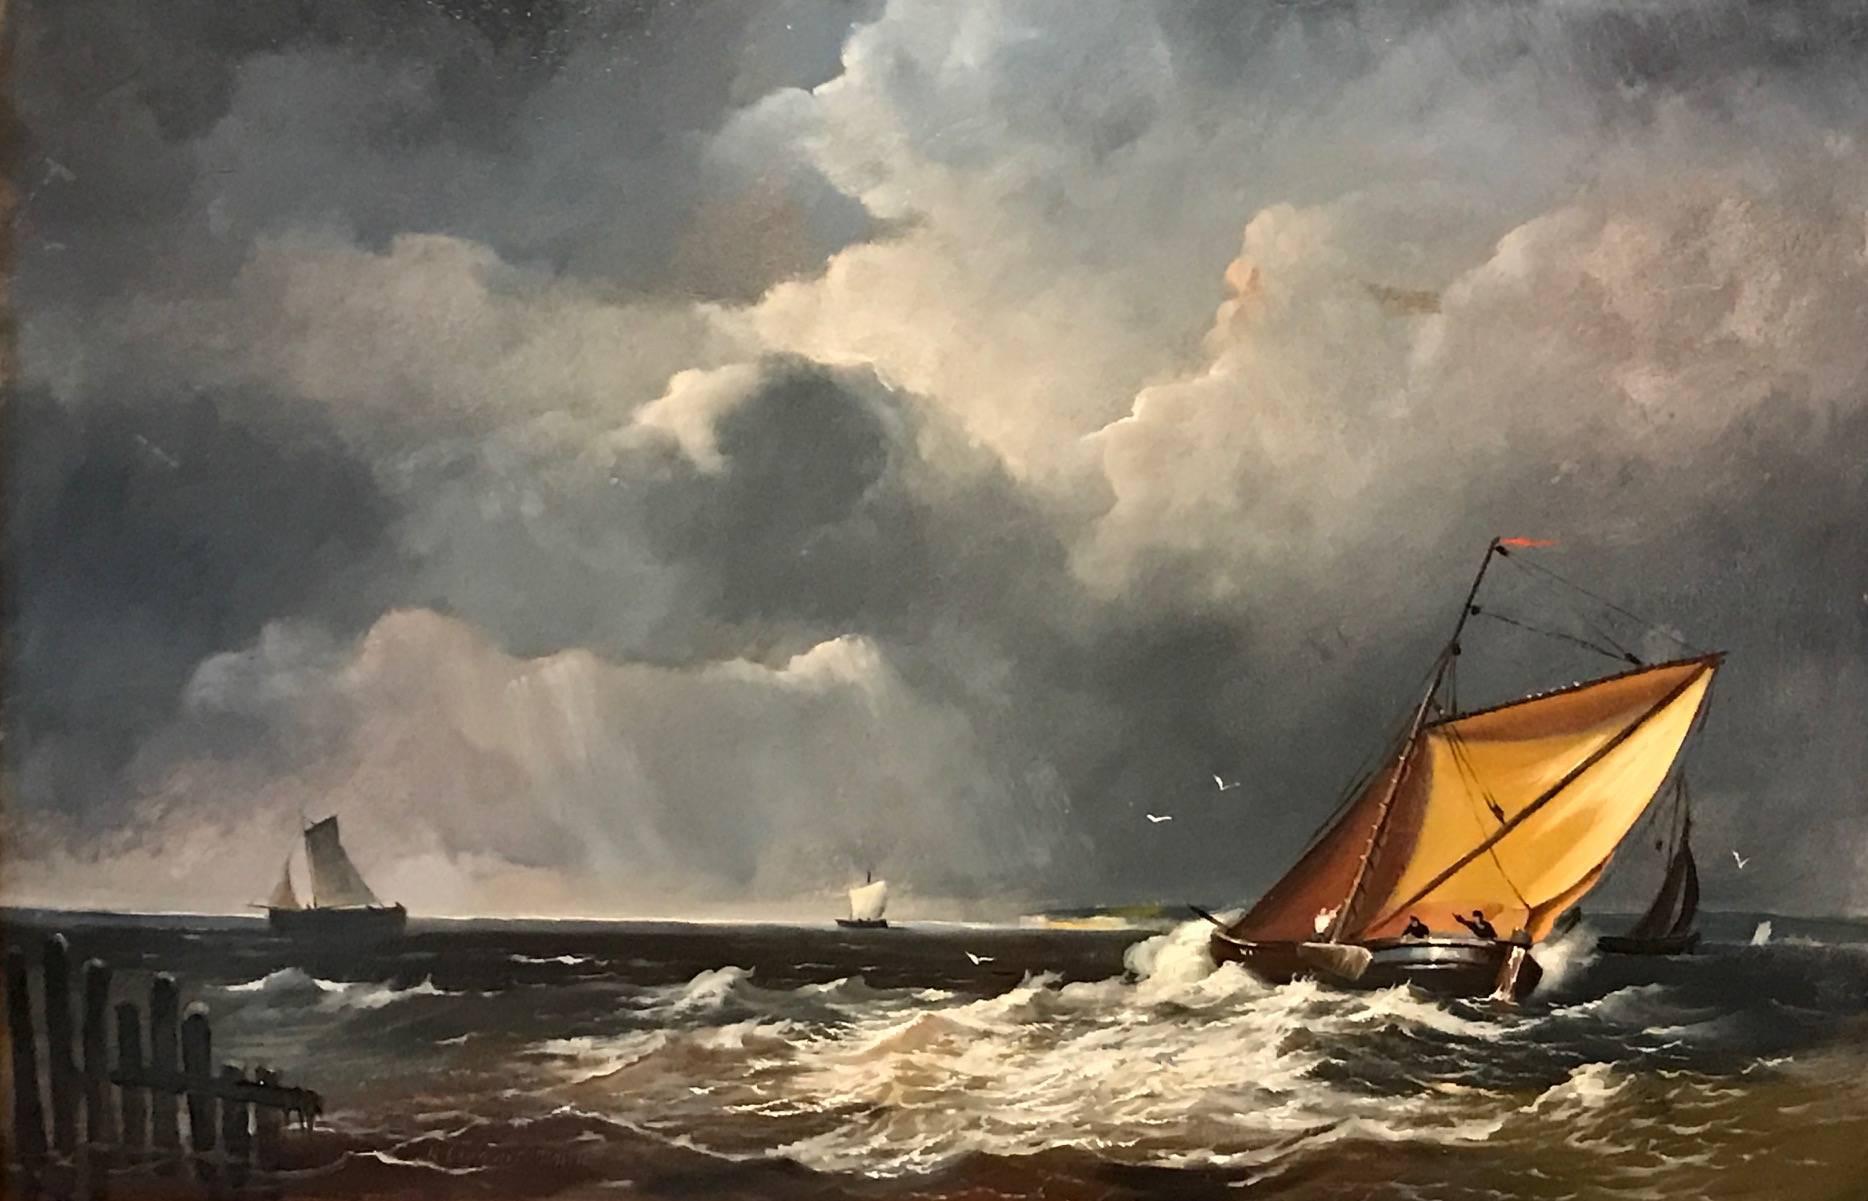 Robert Dumont-Smith Landscape Painting - Fine British Maritime Oil Painting - Shipping in Rough Seas - Signed